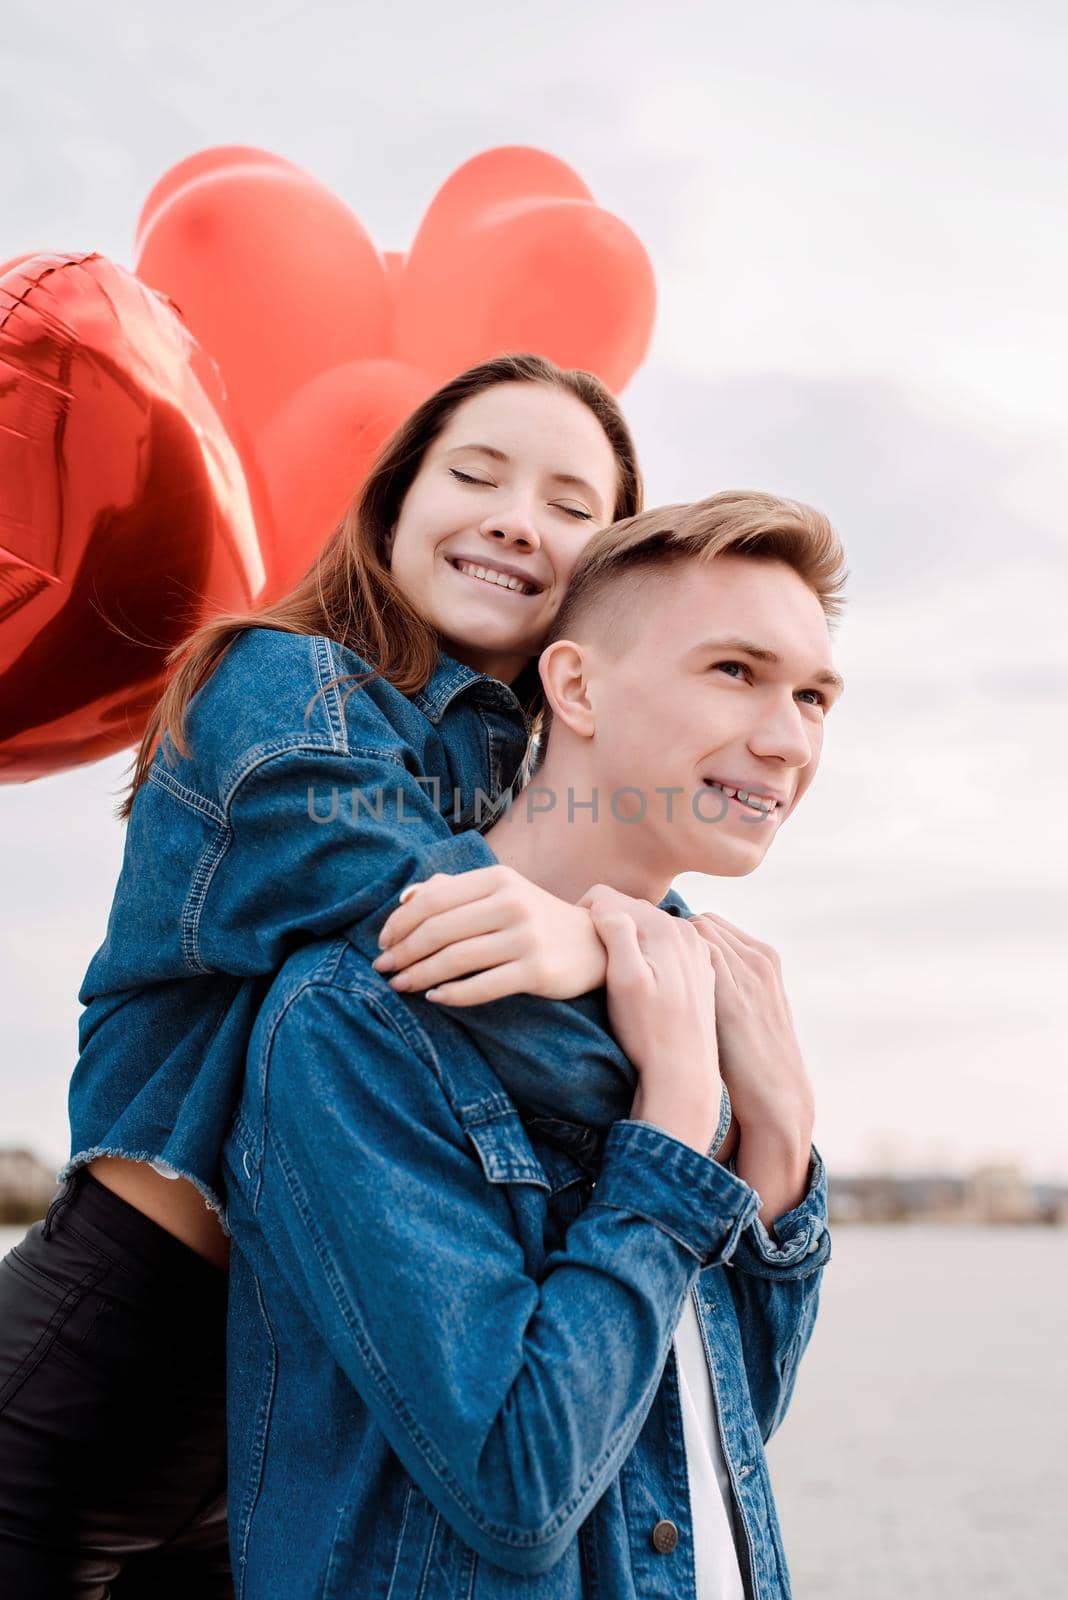 young loving couple with red balloons embracing outdoors by Desperada